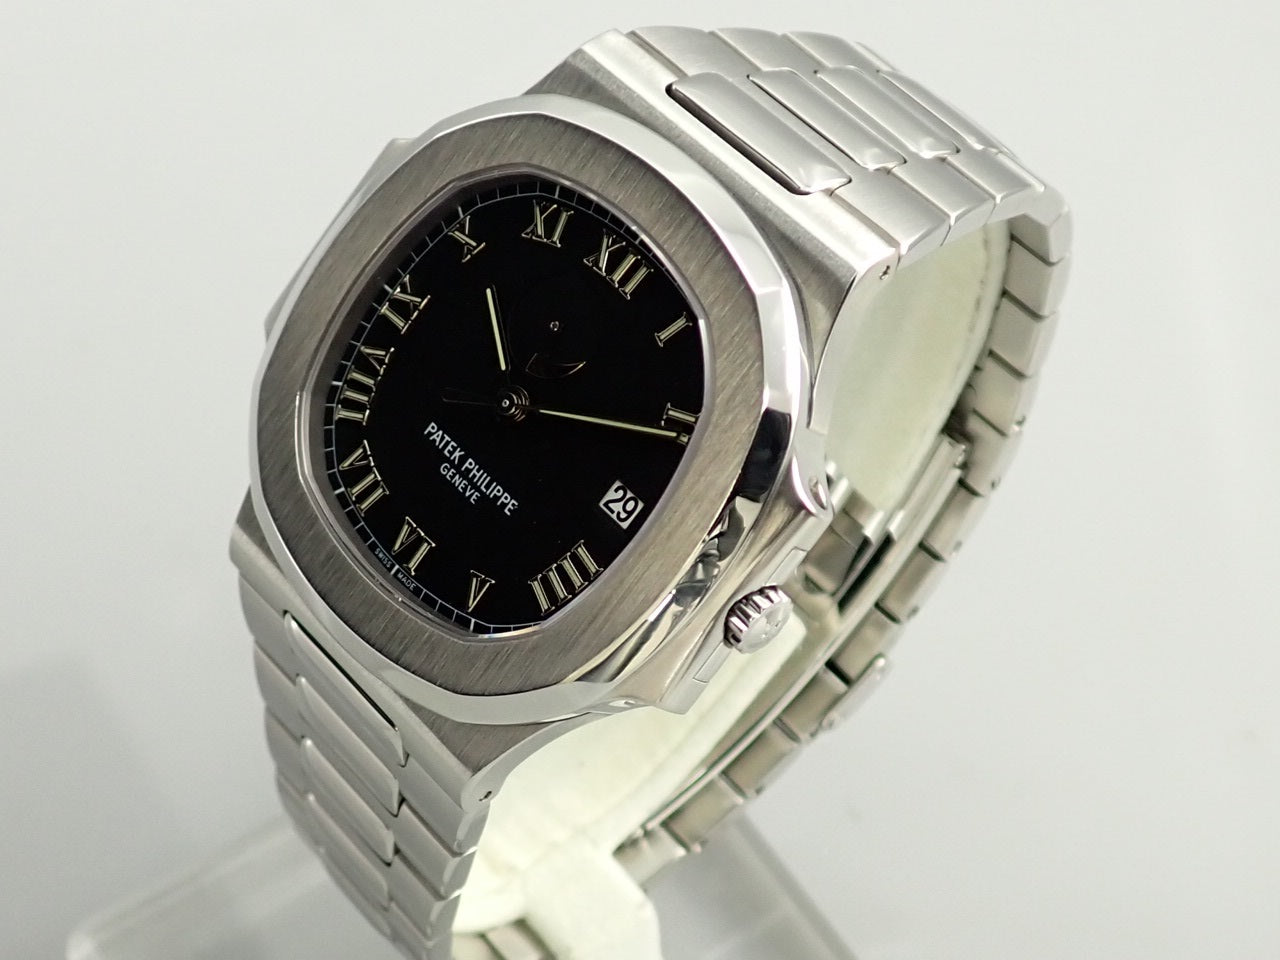 Patek Philippe Nautilus &lt;Box and other details&gt;